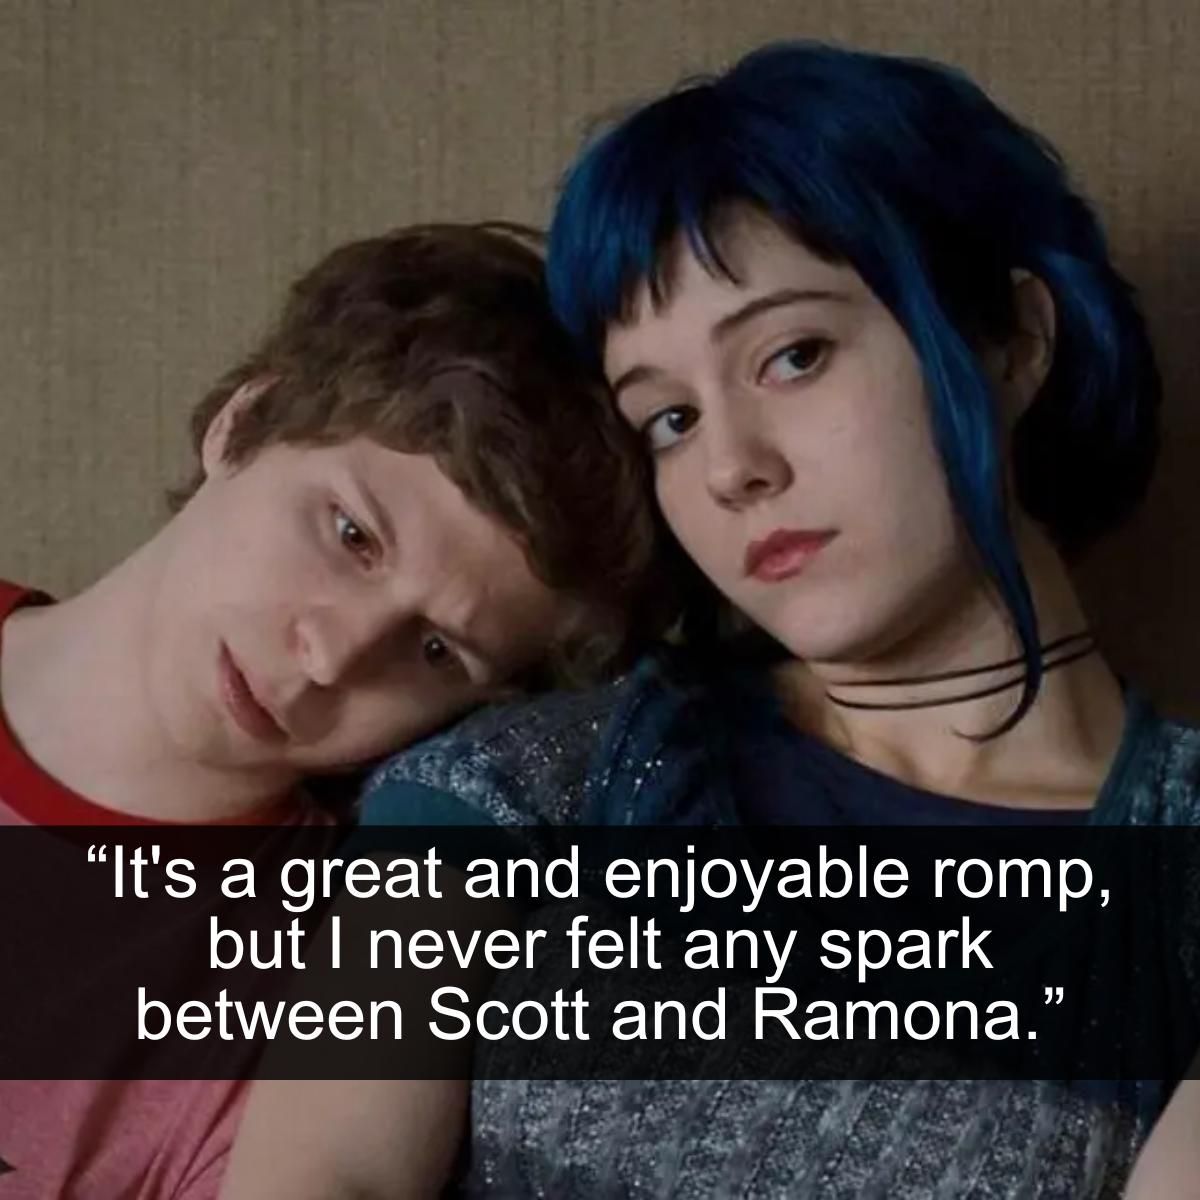 <p>Scott Pilgrim vs. the World is a fantastic comic series that was adapted into both an excellent video game, a fun TV show, and a fascinating live-action movie starring Michael Cera. Steeped in video game lore and early 2000 memes and inside jokes, it only appeals to a niche audience. However, that niche audience also helped it appeal to a broader audience. The movie is fun. The visuals are enjoyable.</p> <p>The romance between Ramona Flowers and Scott Pilgrim, however, is just stupid. The entire thing opens up with Scott being labeled as a predator who doesn't really care about women. How is it that he's instantly falling in love with a random person? Also, Ramona Flowers could have done a lot better than Scott. No fire was visible to fans so better to just extinguish that completely.</p>